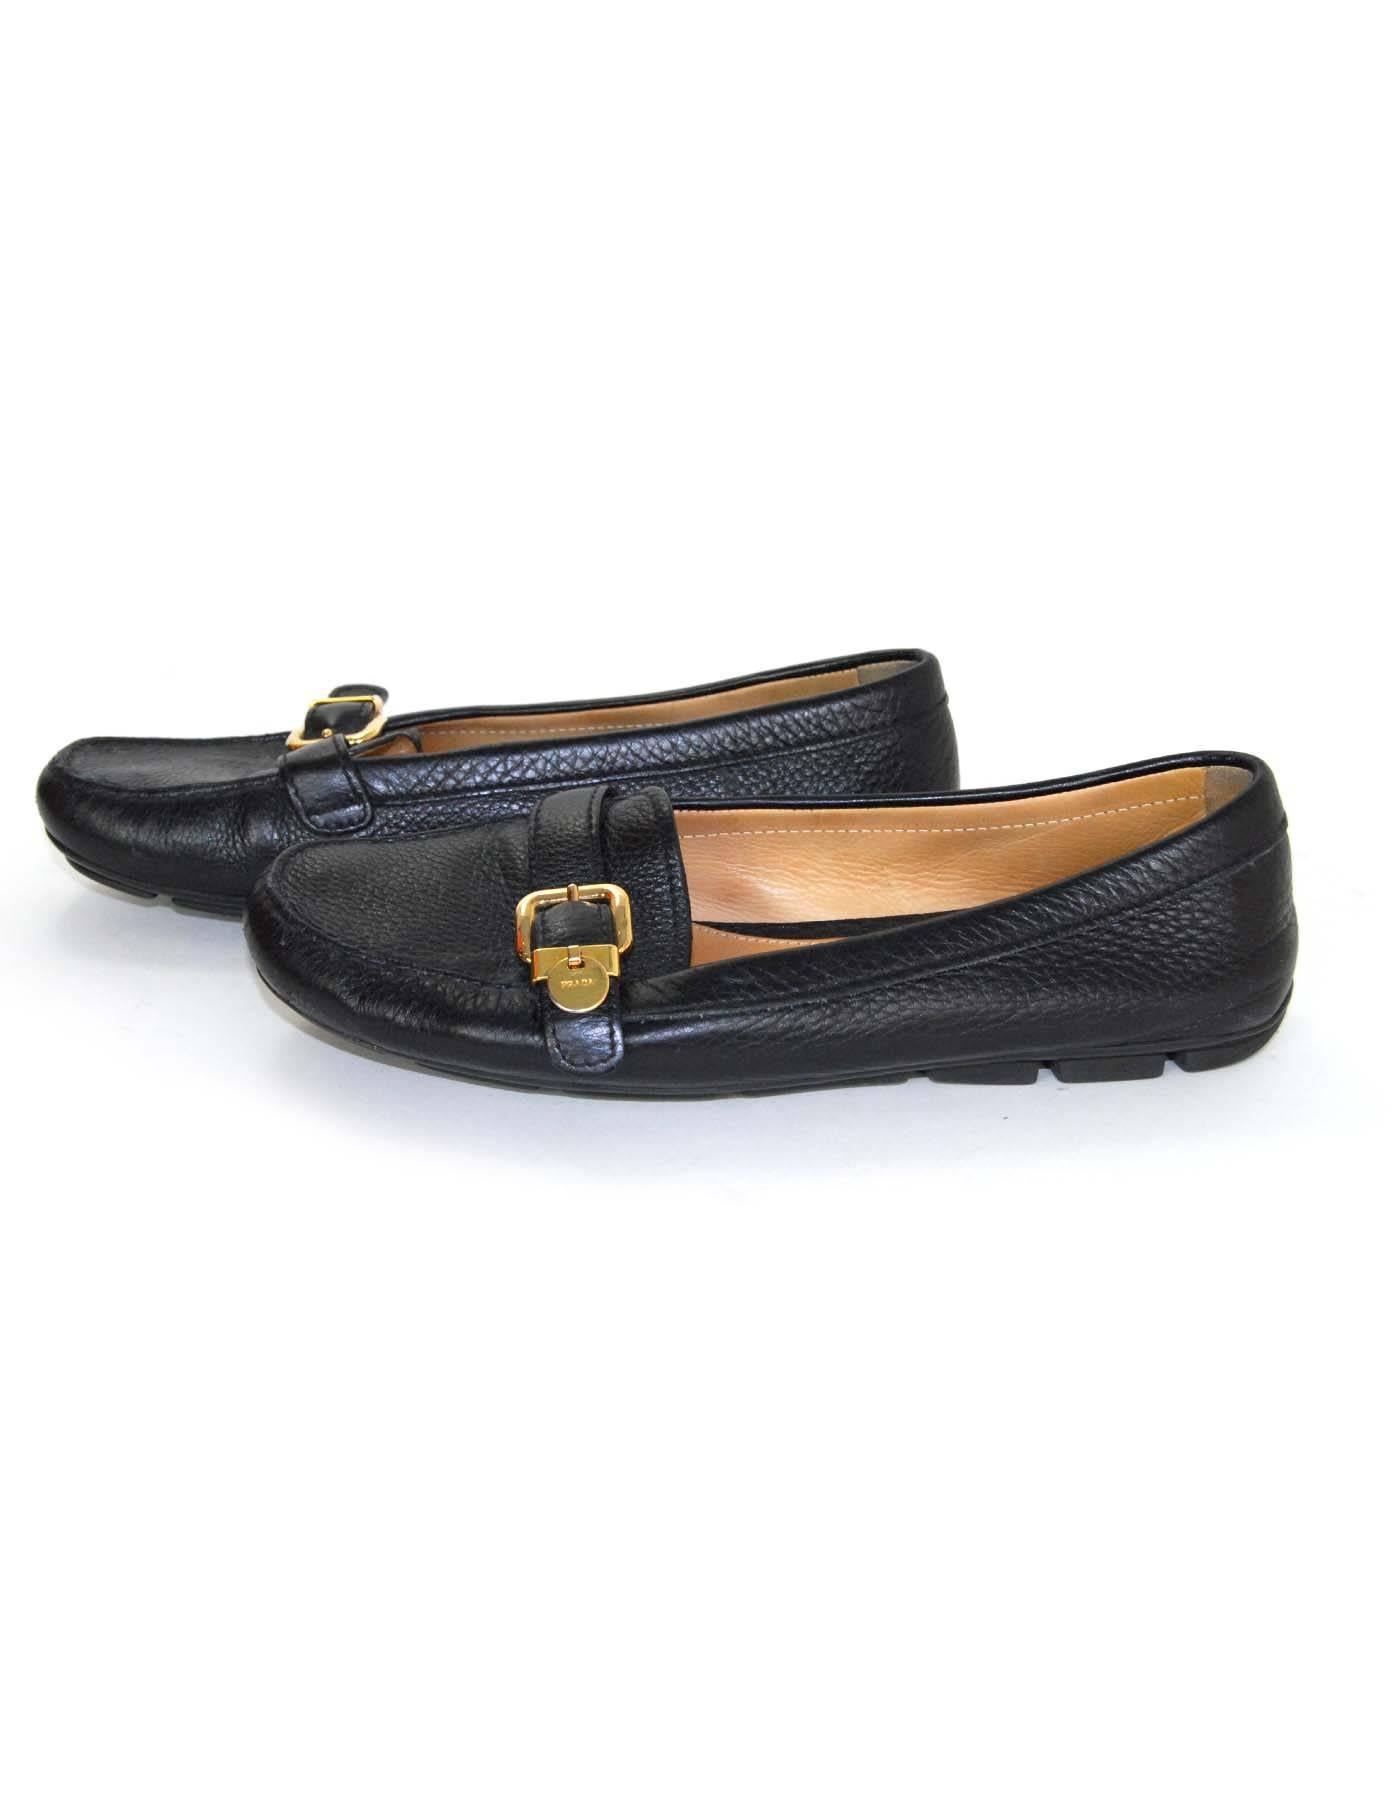 Prada Black Leather Driving Loafers Sz 40.5

Features goldtone buckle

Color: Black
Materials: Leather
Closure/Opening: Slide on
Sole Stamp: Prada
Overall Condition: Very good pre-owned condition with the exception of some wear to in soles